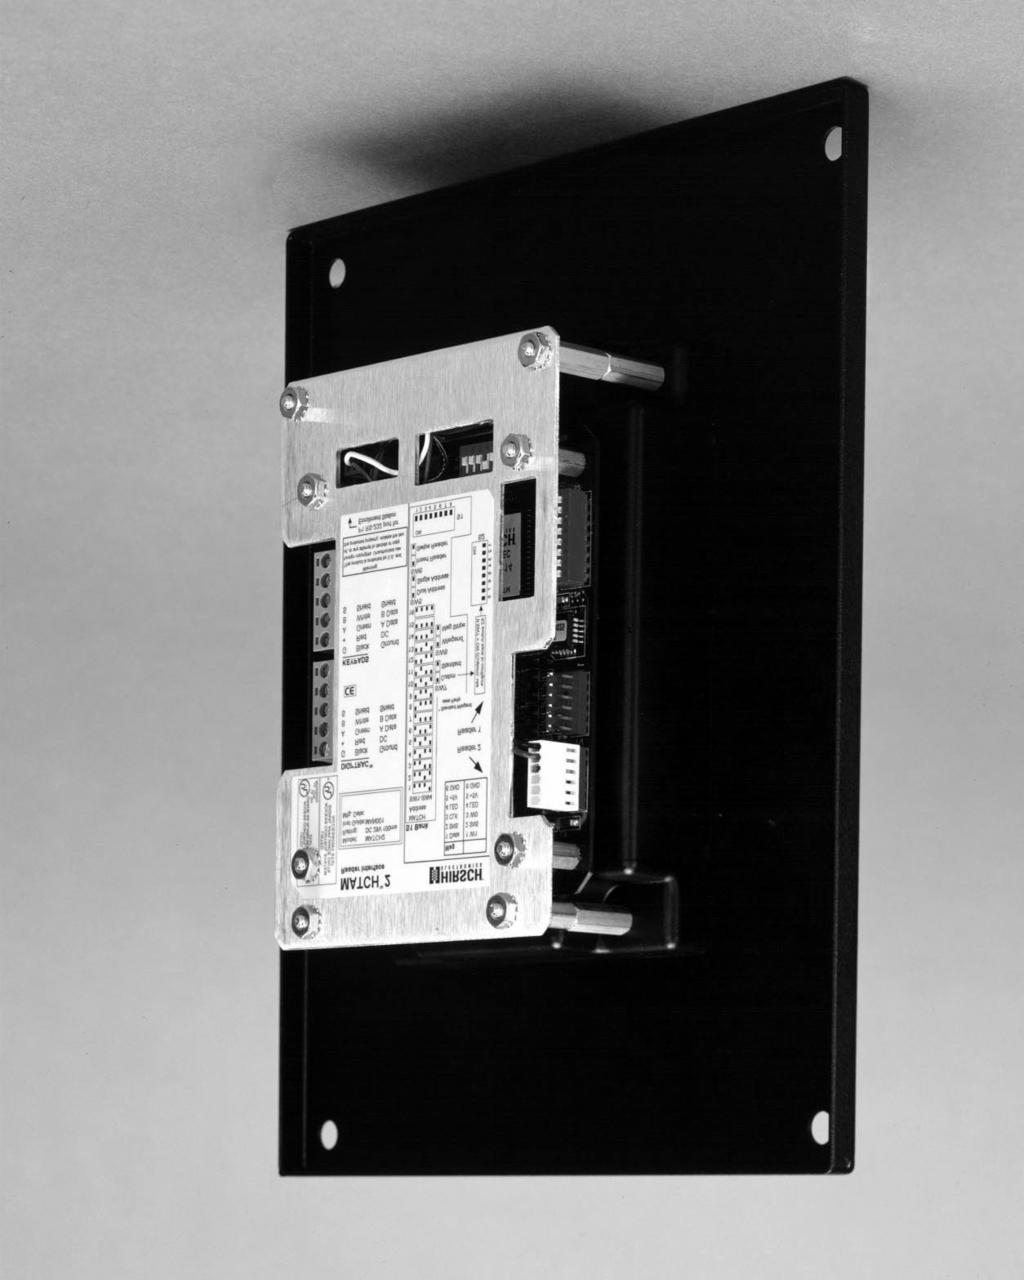 DTA001-0901 Introduction The DIGI*TRAC Annunciator (DTA) is used to monitor basic security functions such as alarm, input, and relay status.